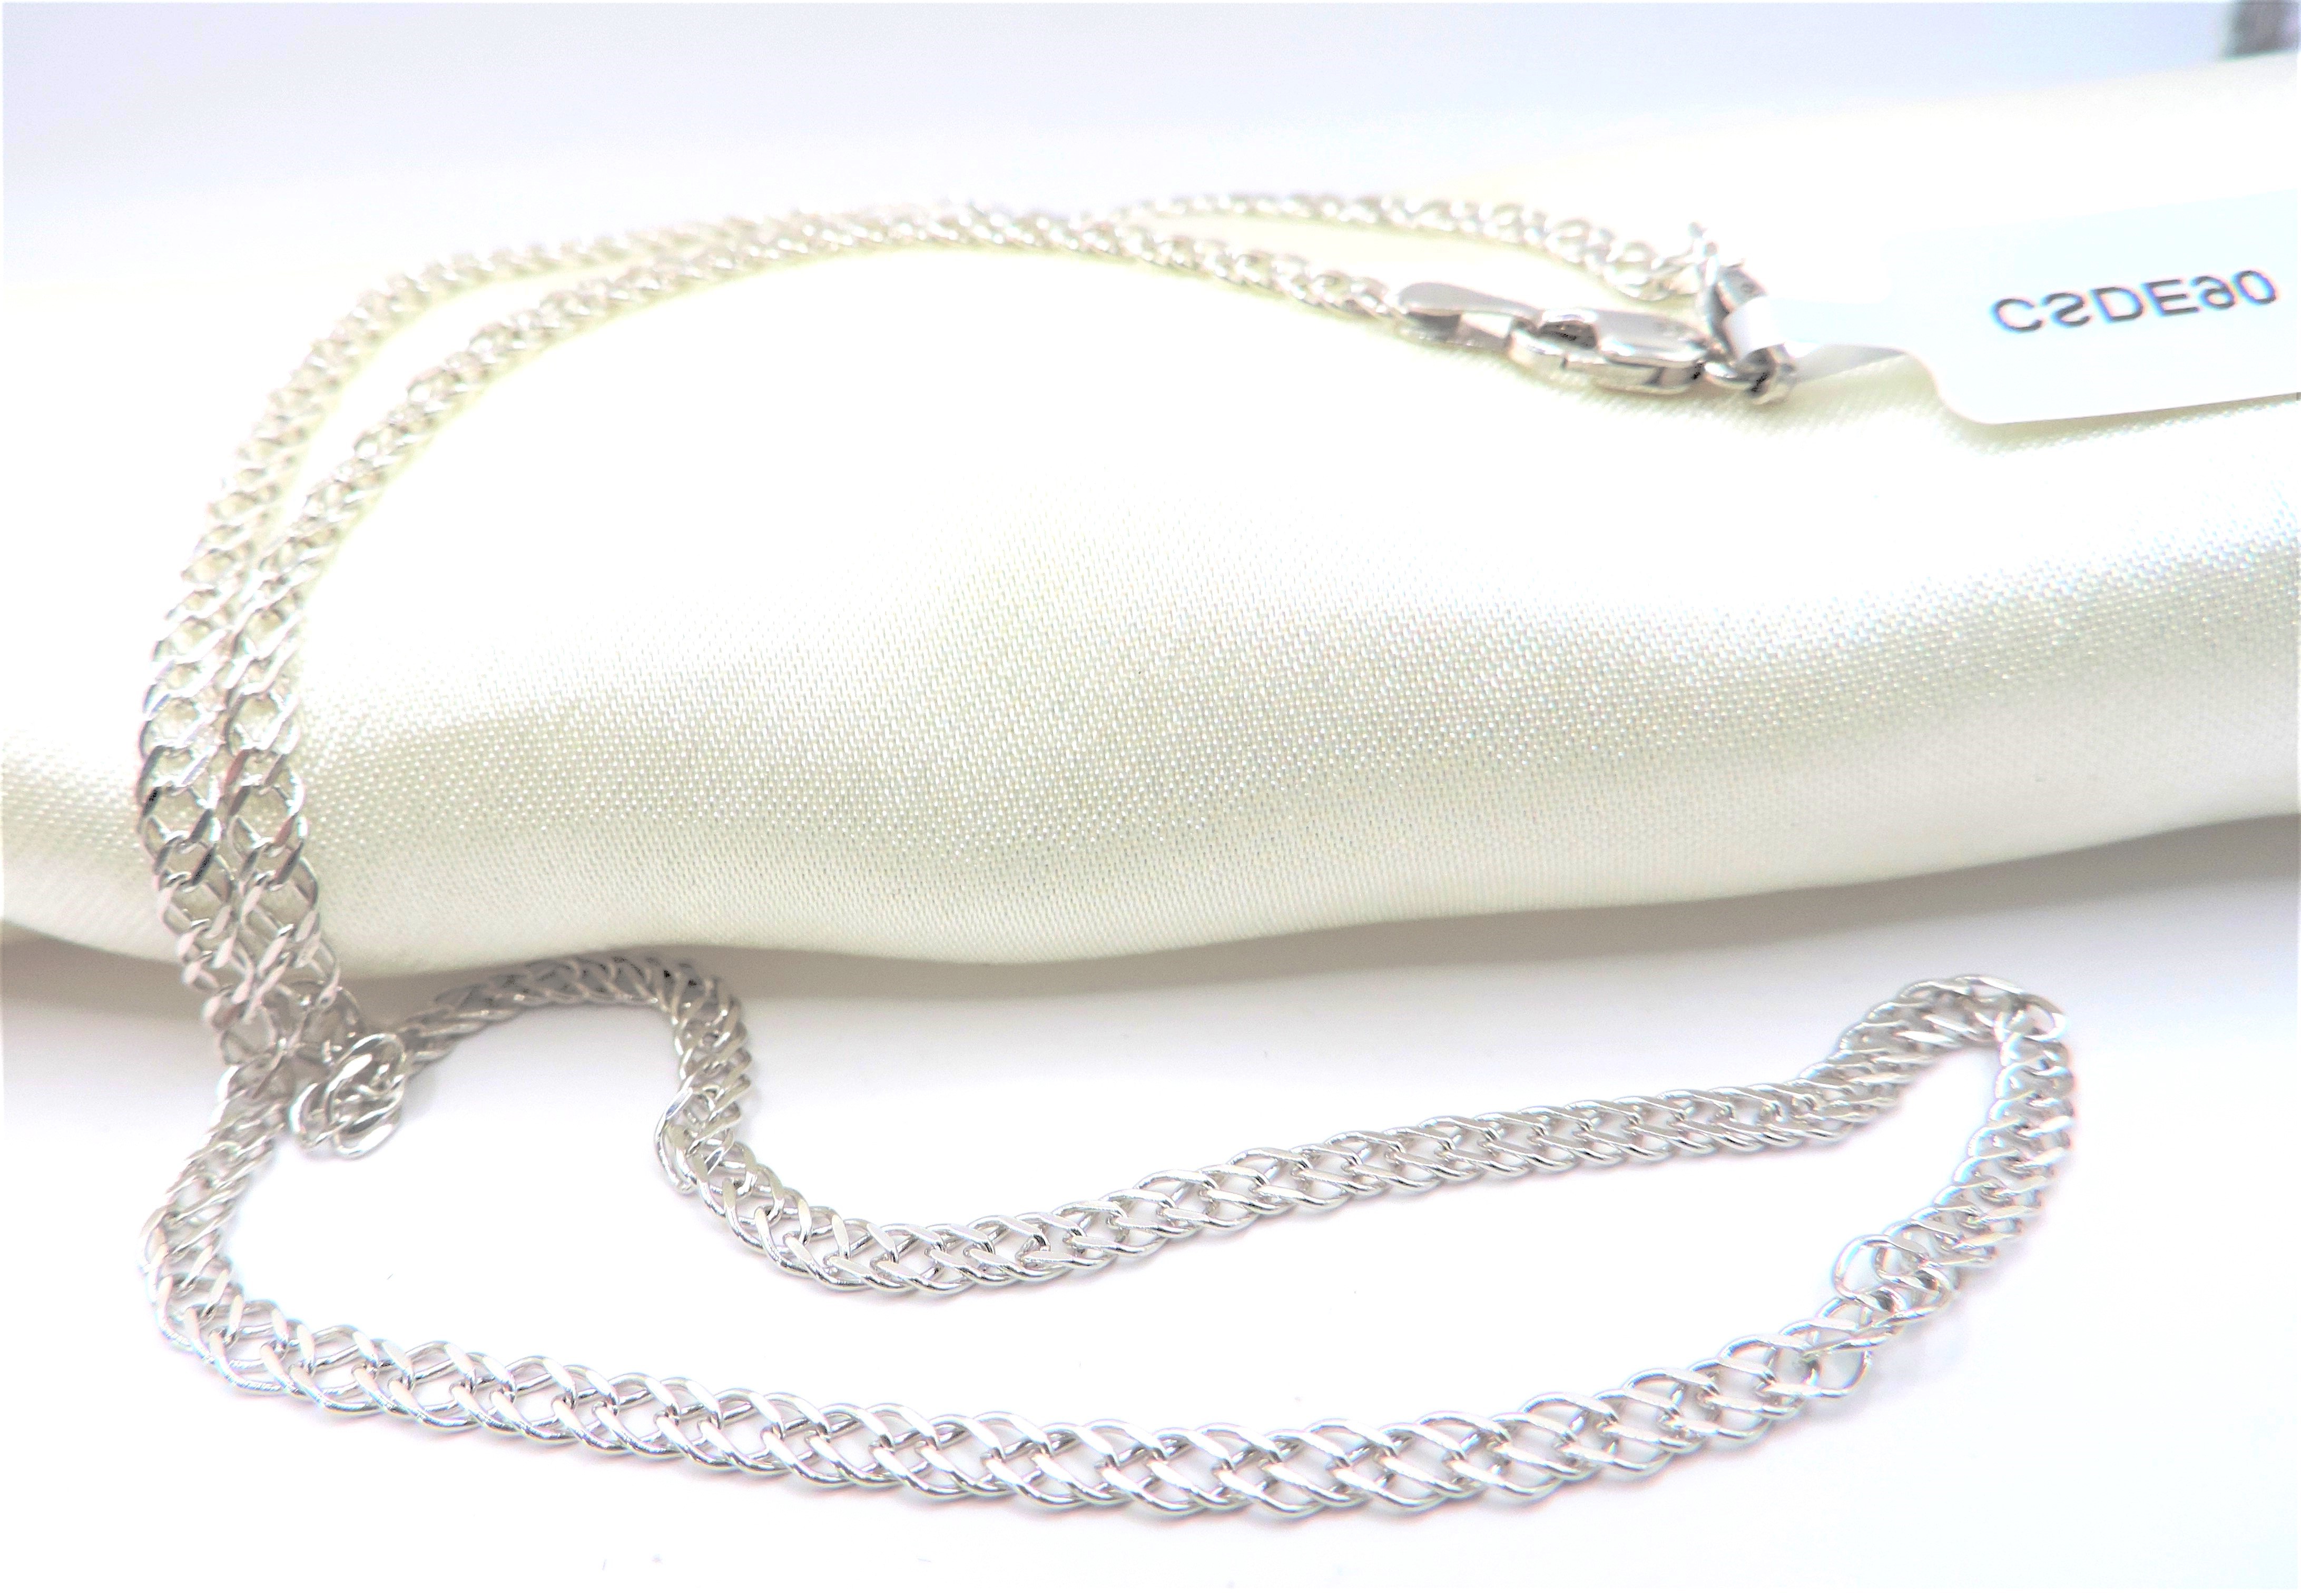 Sterling Silver 18 inch Chain Necklace New with Gift Pouch - Image 2 of 2